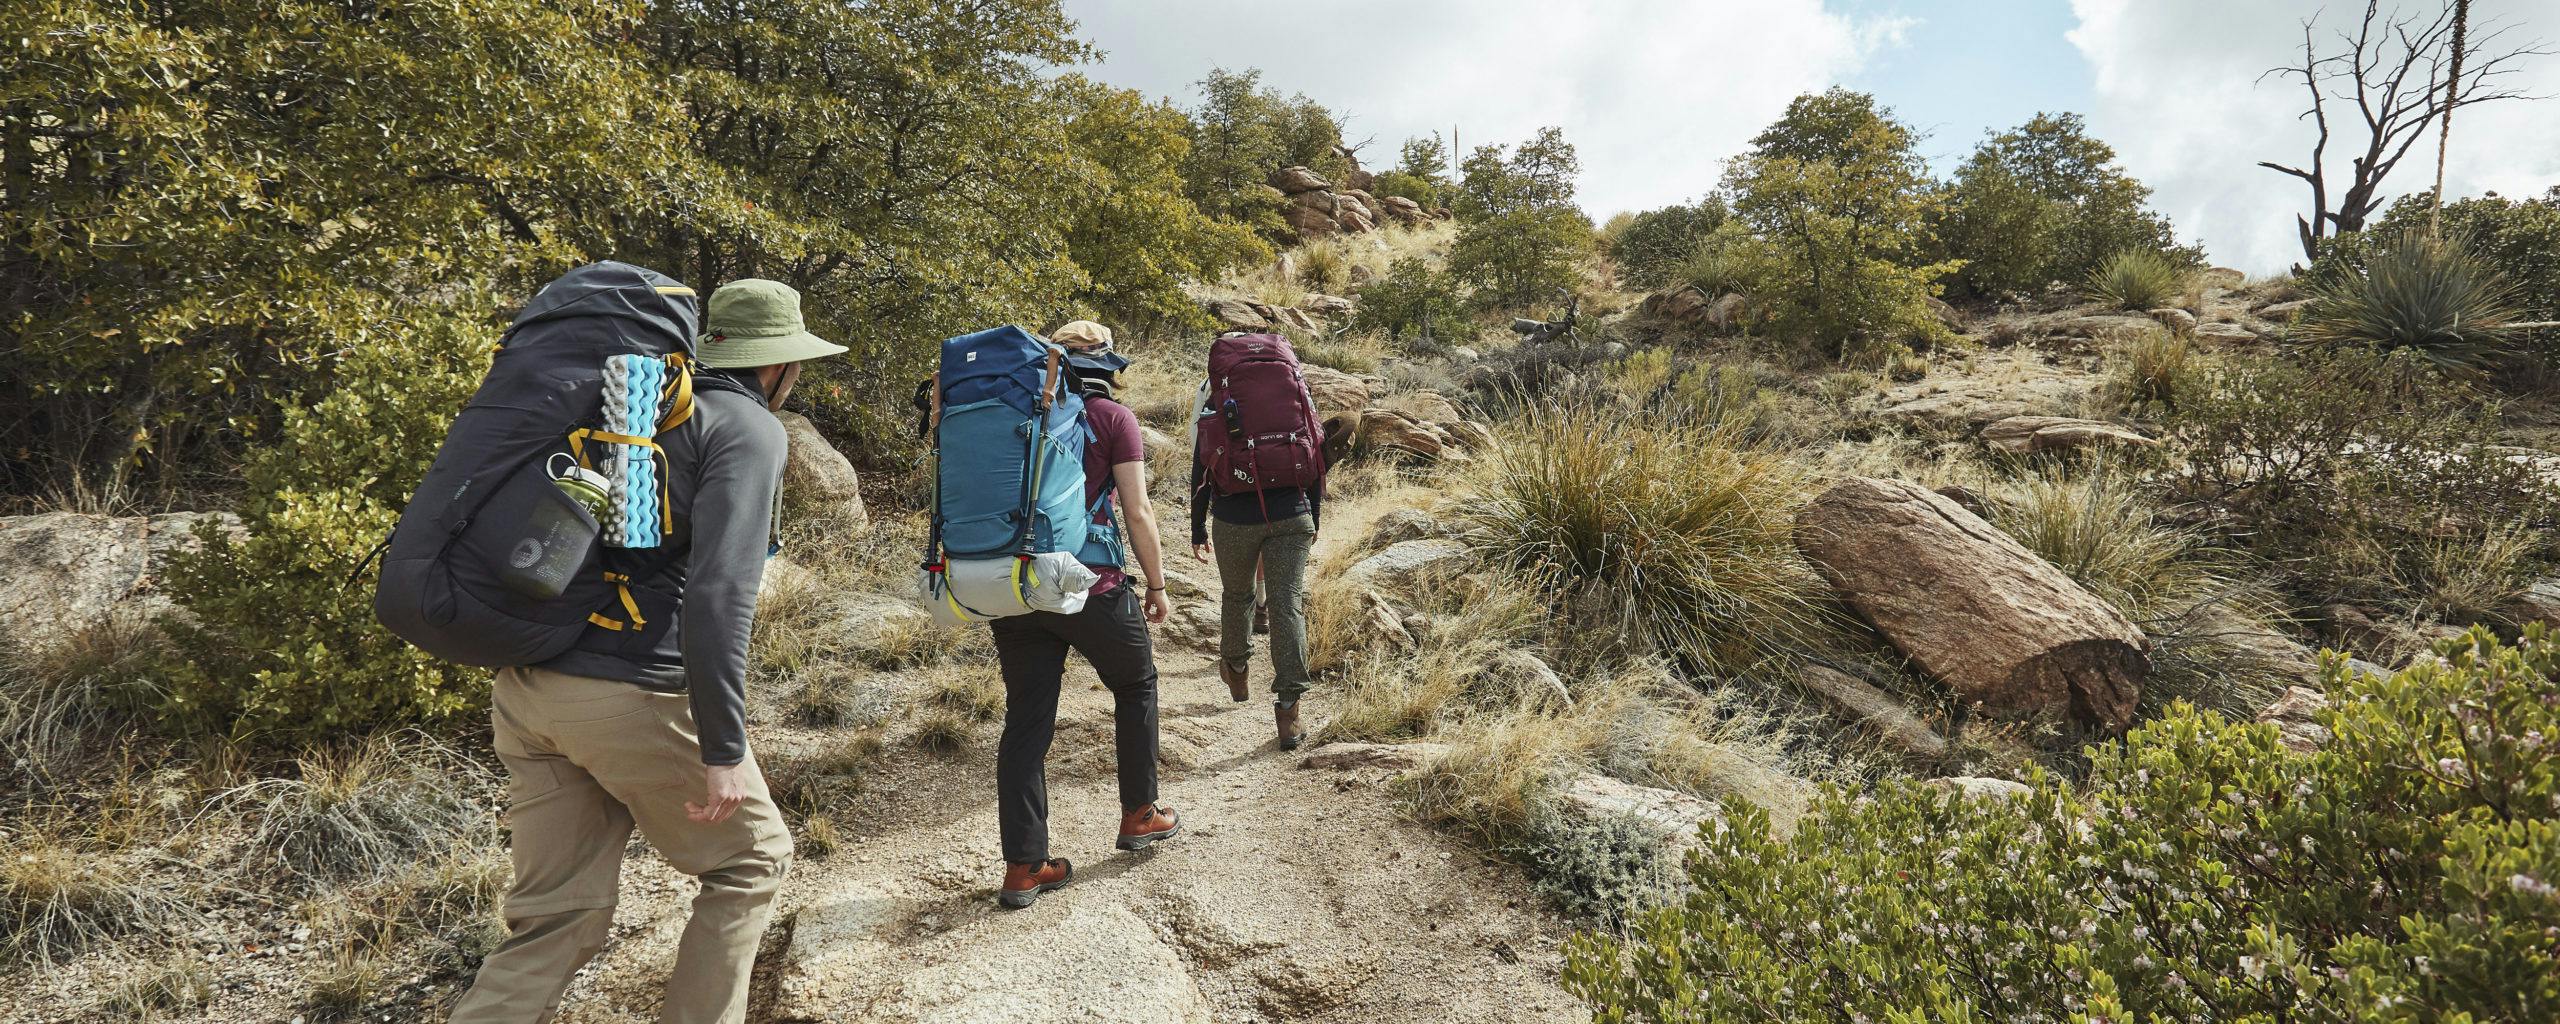 https://images.prismic.io/mecheadless/ZjNmYzM2MmEtOTU1Ny00ZGVjLWFiMmItZDM5ZjUxMzQxYWFl_backpacking-hikers-with-packs-131a5591-scaled.jpgv1613759143?auto=compress,format&rect=0,0,2560,1024&w=2560&h=1024